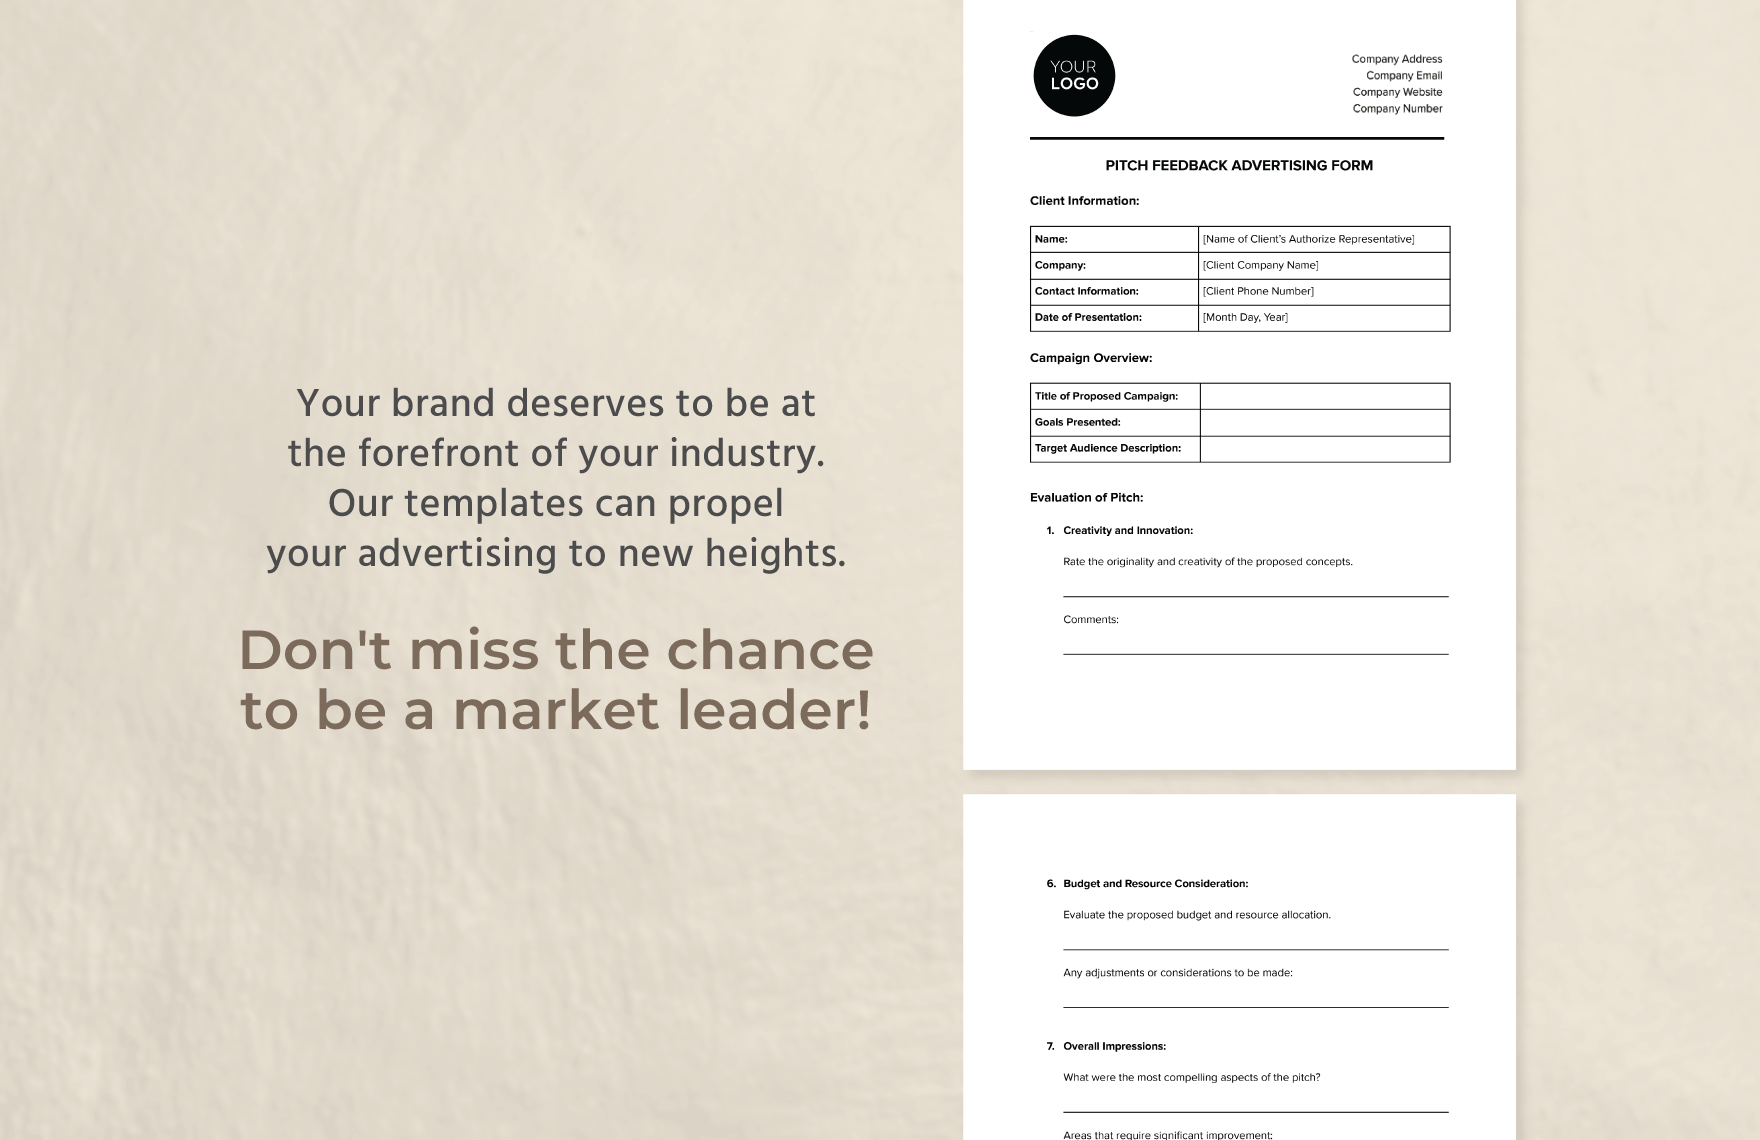 Pitch Feedback Advertising Form Template